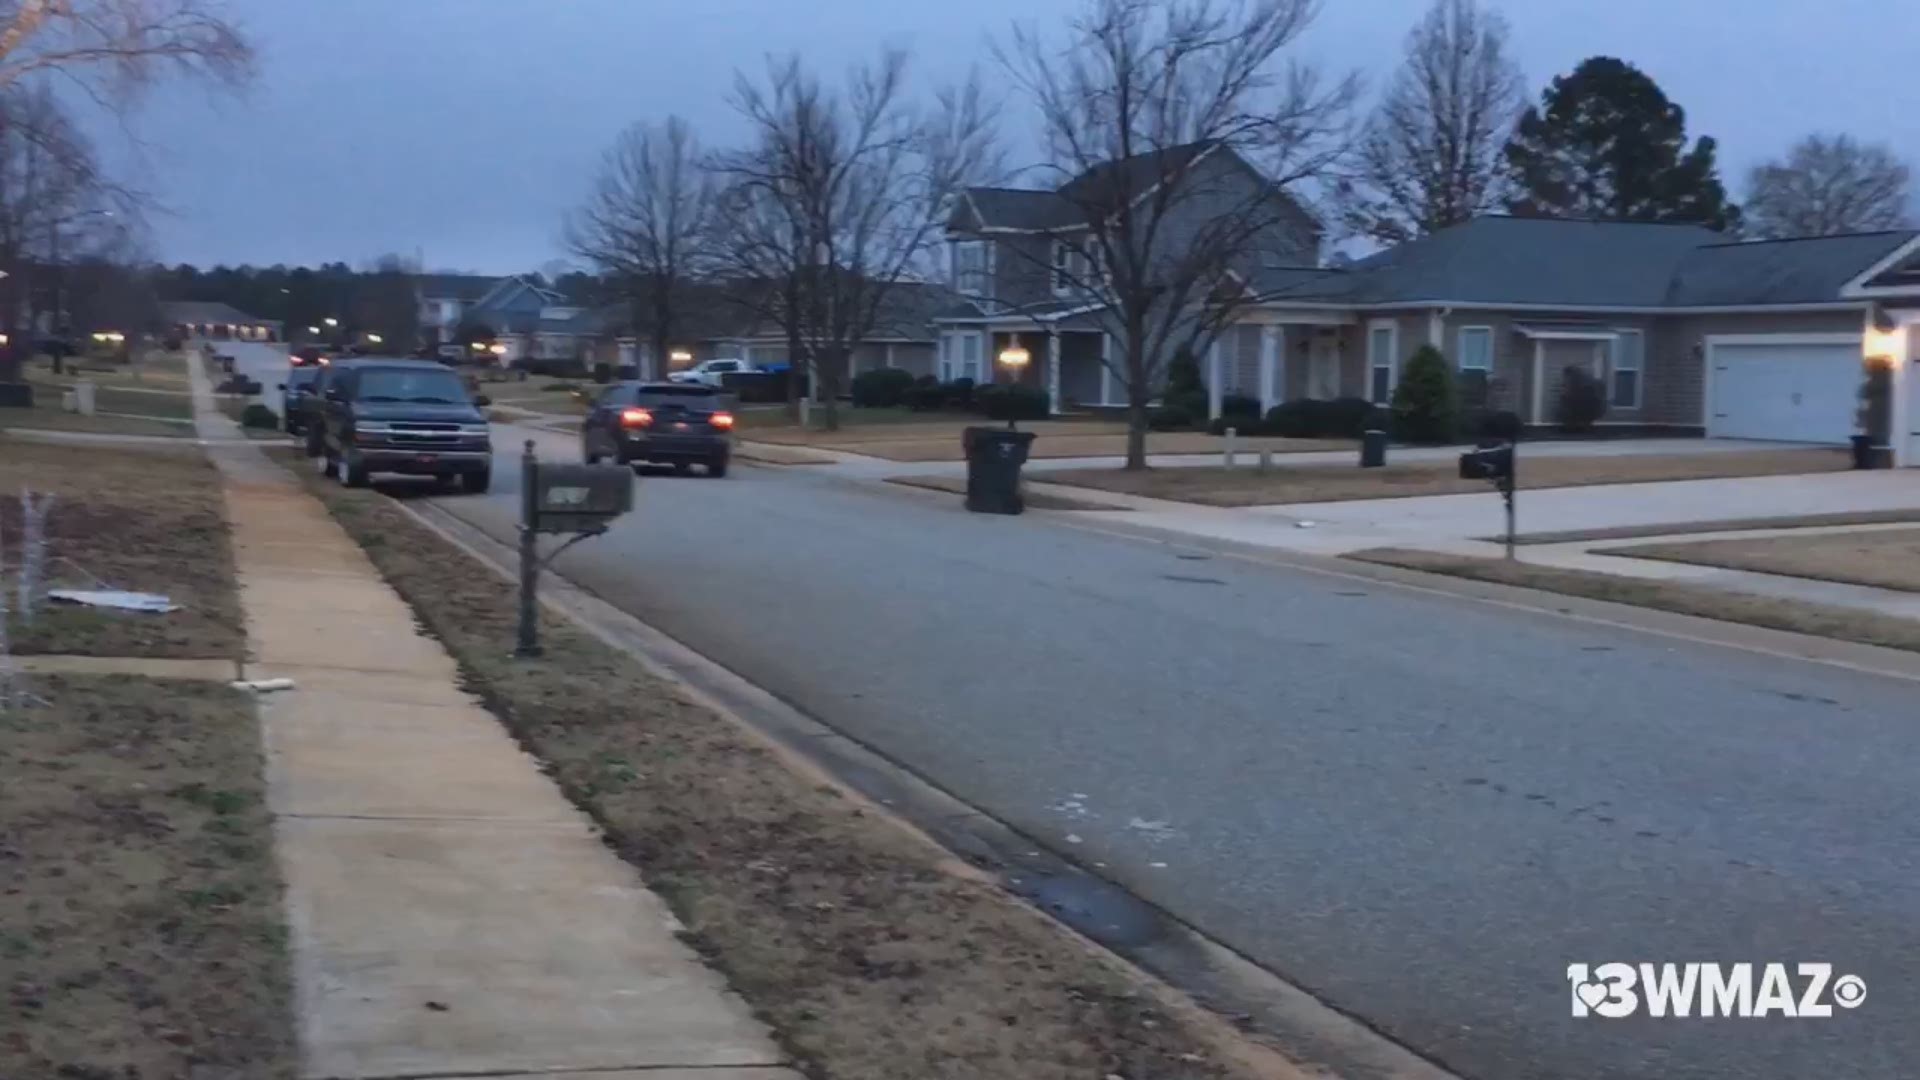 Scene video from the area where Bo Dukes allegedly raped and sodomized women at gunpoint